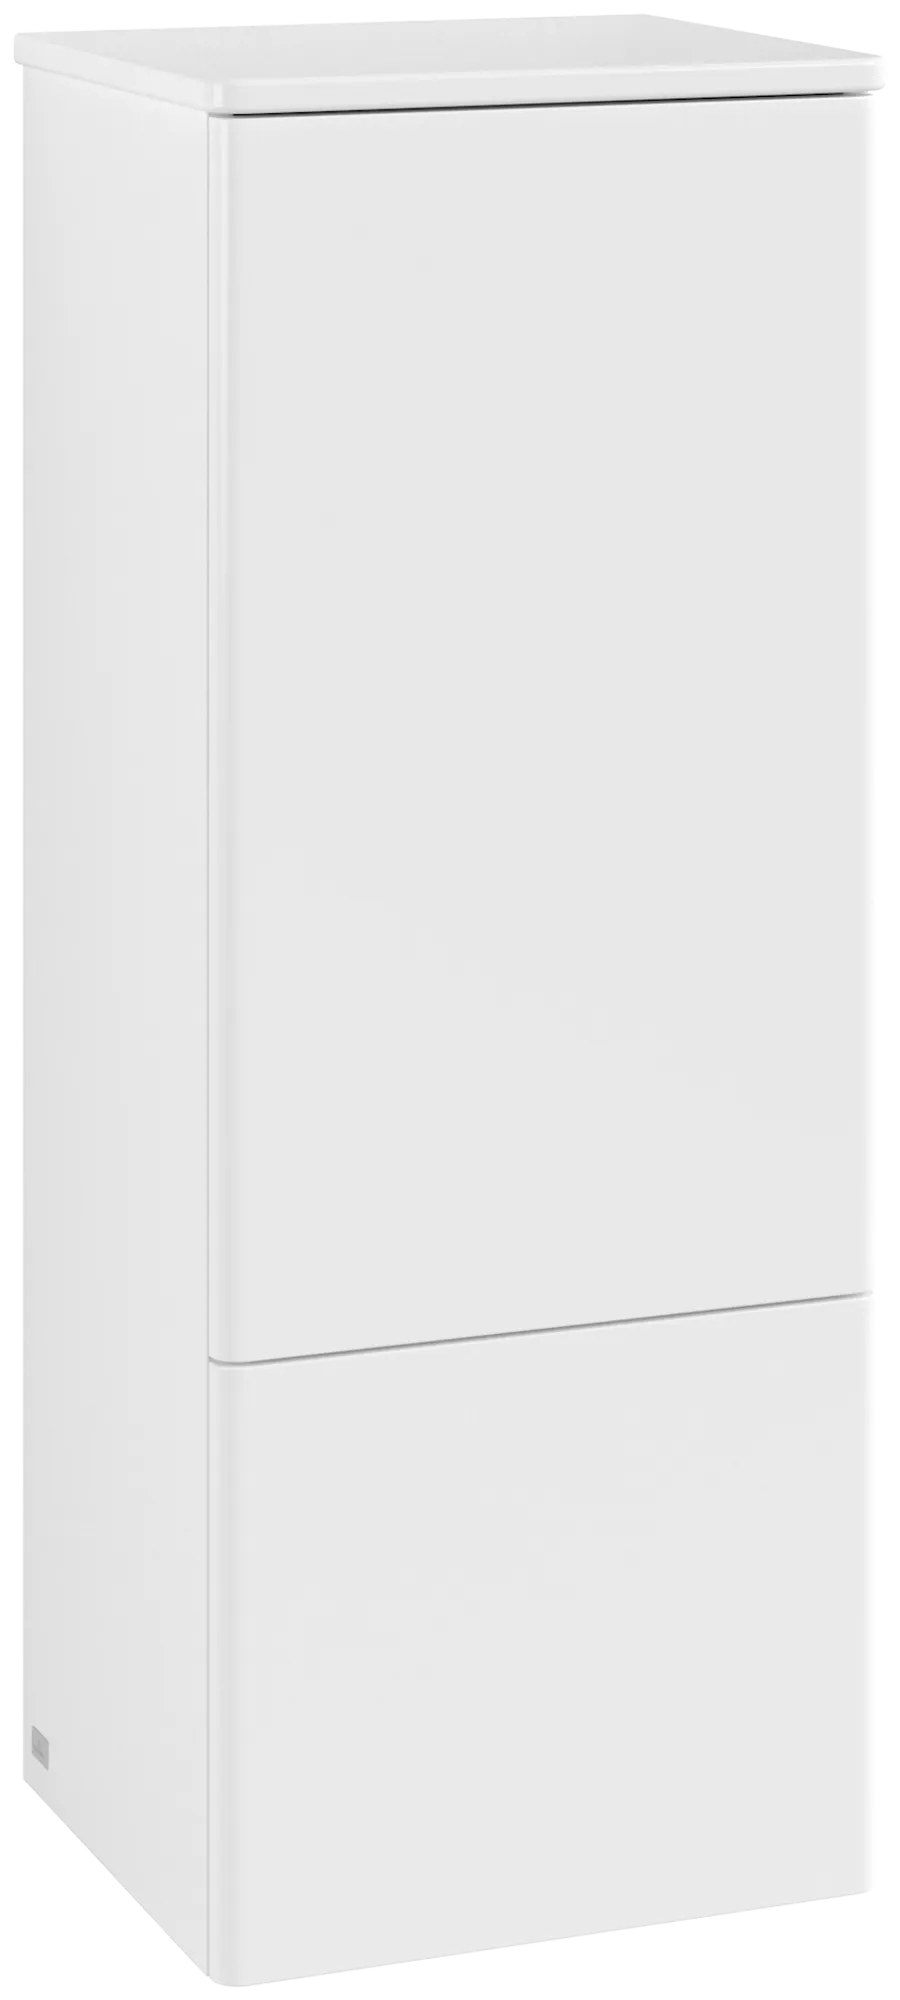 Obrázek VILLEROY BOCH Antao Medium-height cabinet, with lighting, 1 door, 414 x 1039 x 356 mm, Front without structure, White Matt Lacquer / White Matt Lacquer #L44000MT